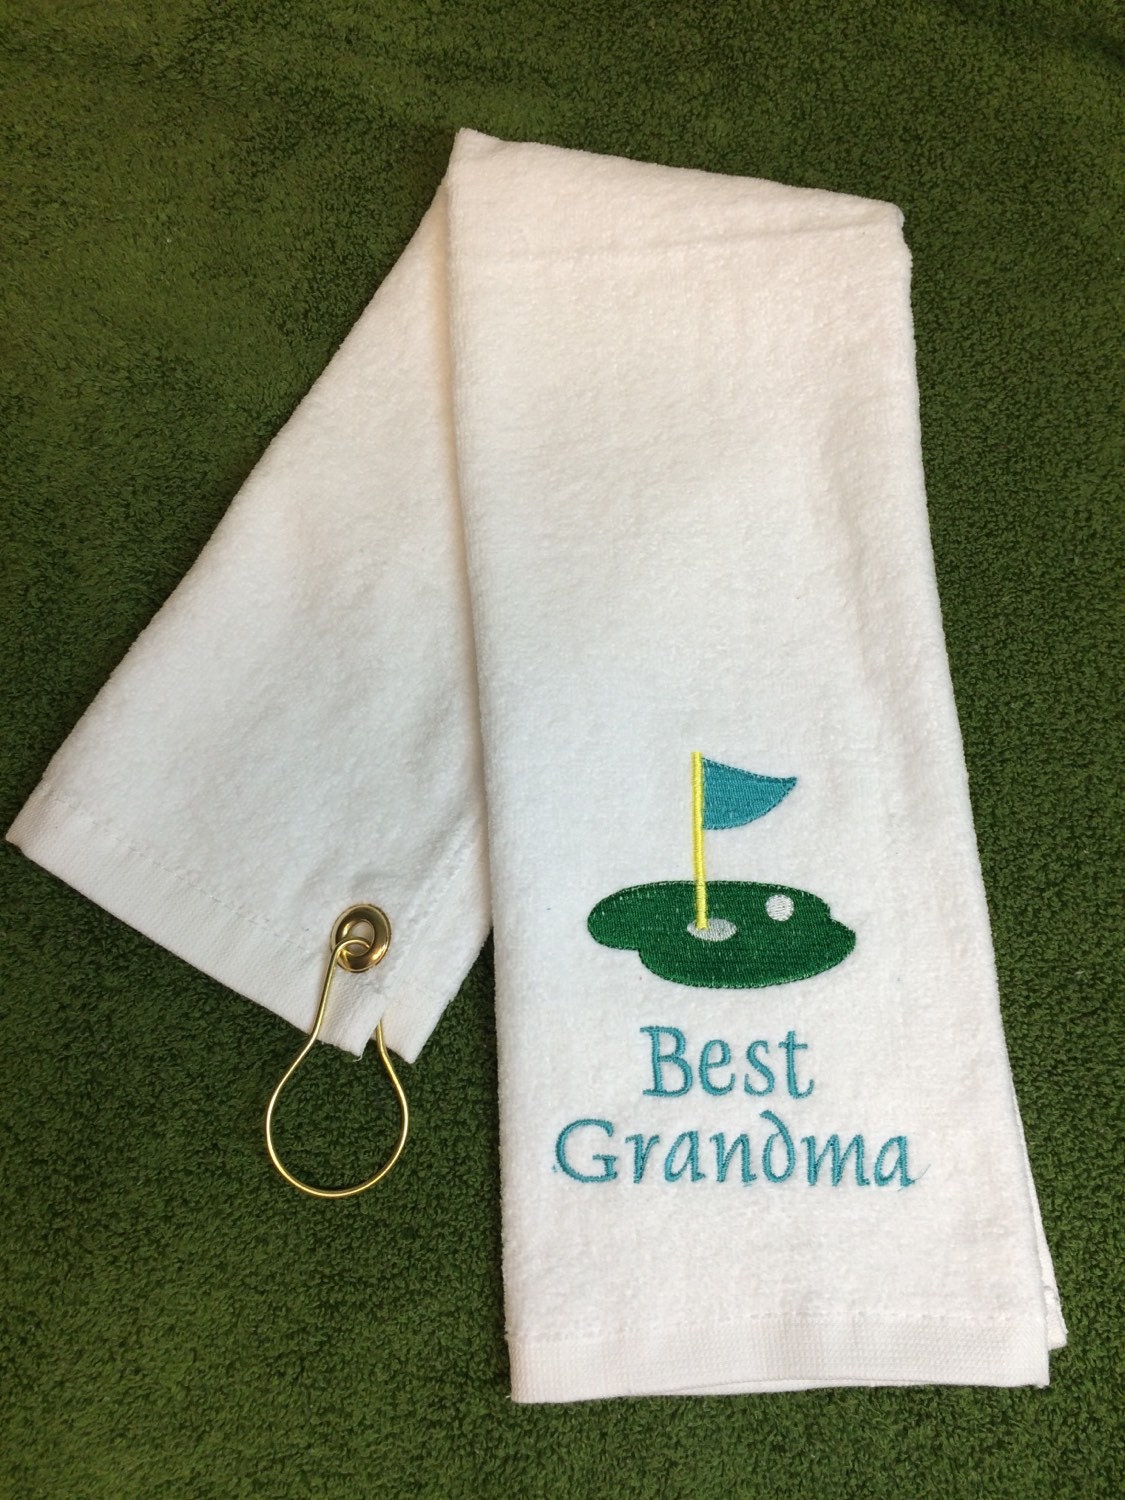 Golf towel with custom embroidery Etsy